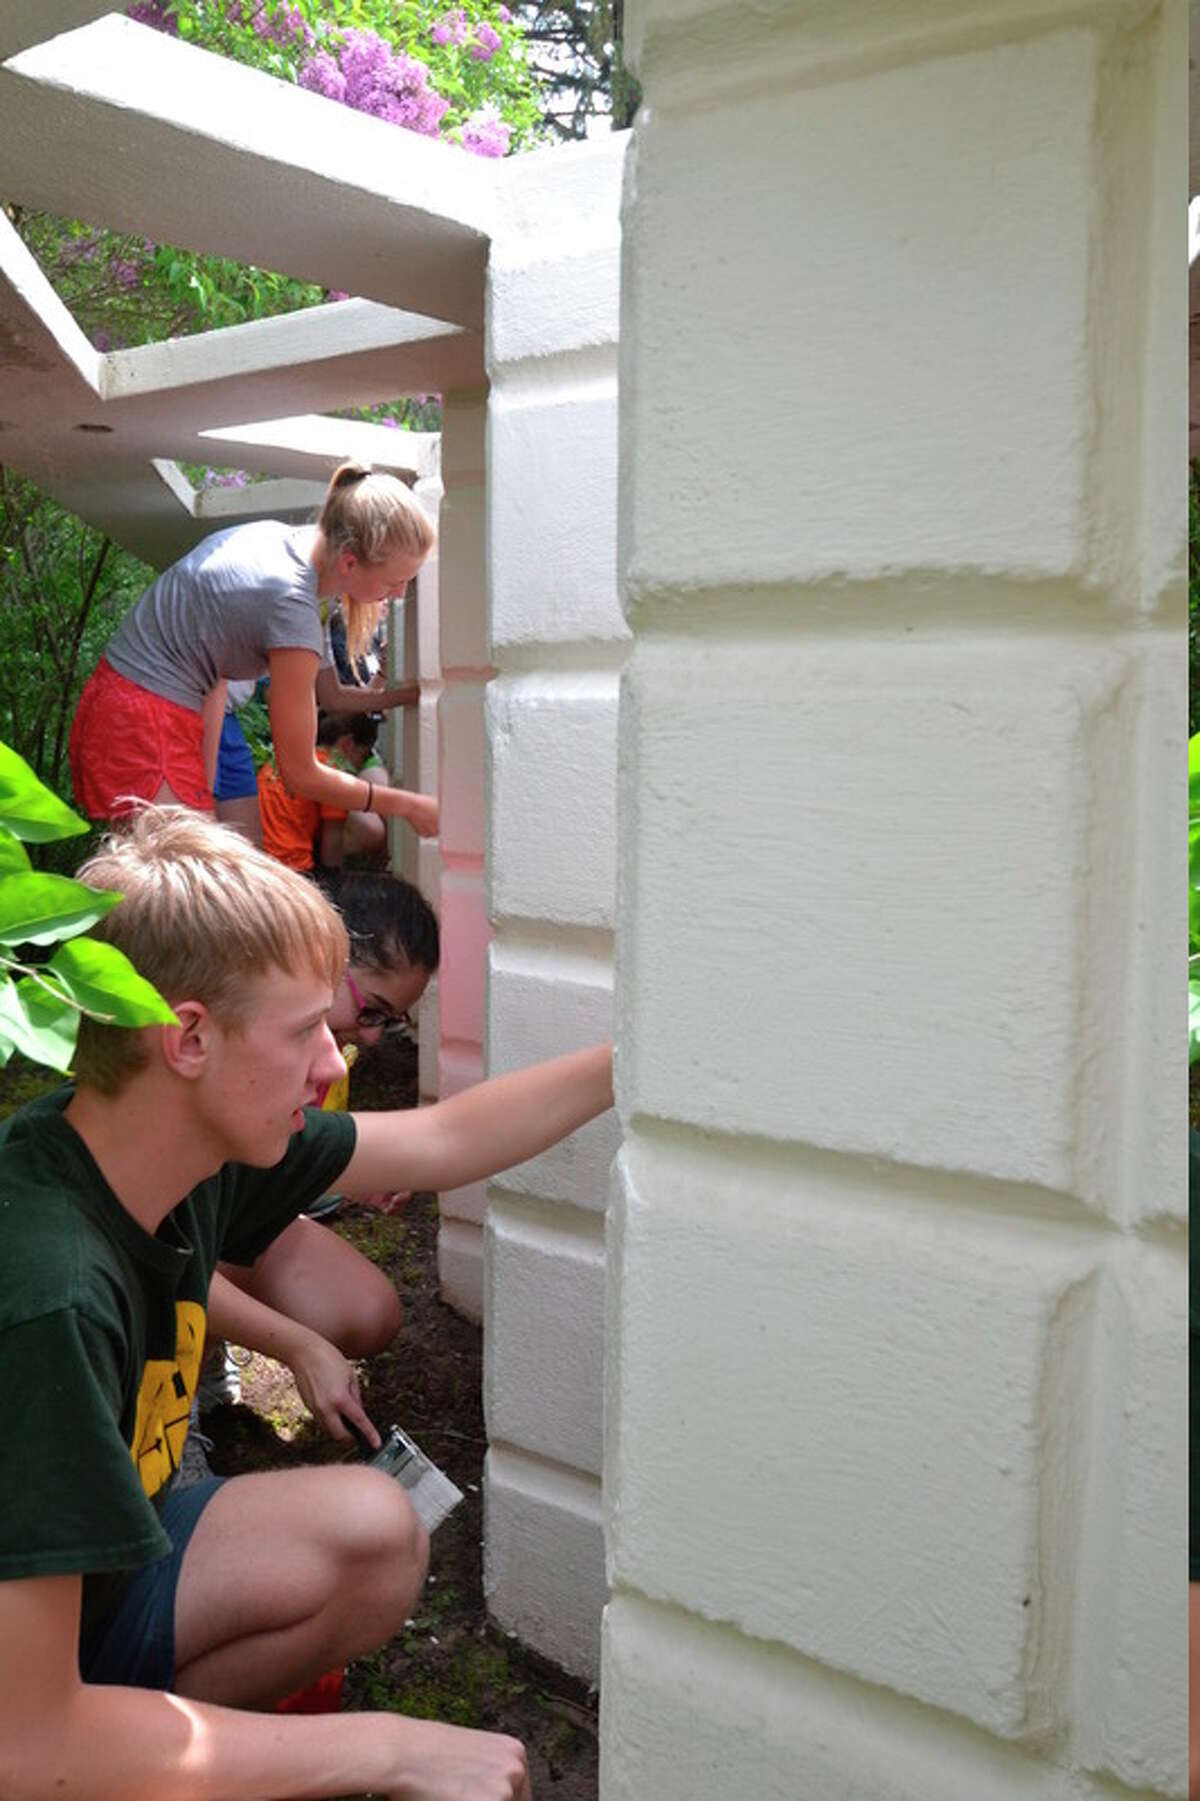 Photo provided Students painted the Unit Block 'grape vine wall' in the inner courtyard of the Home and Studio. Architect Alden B. Dow designed 13 structures that used his rhomboid-shaped Unit Block system.